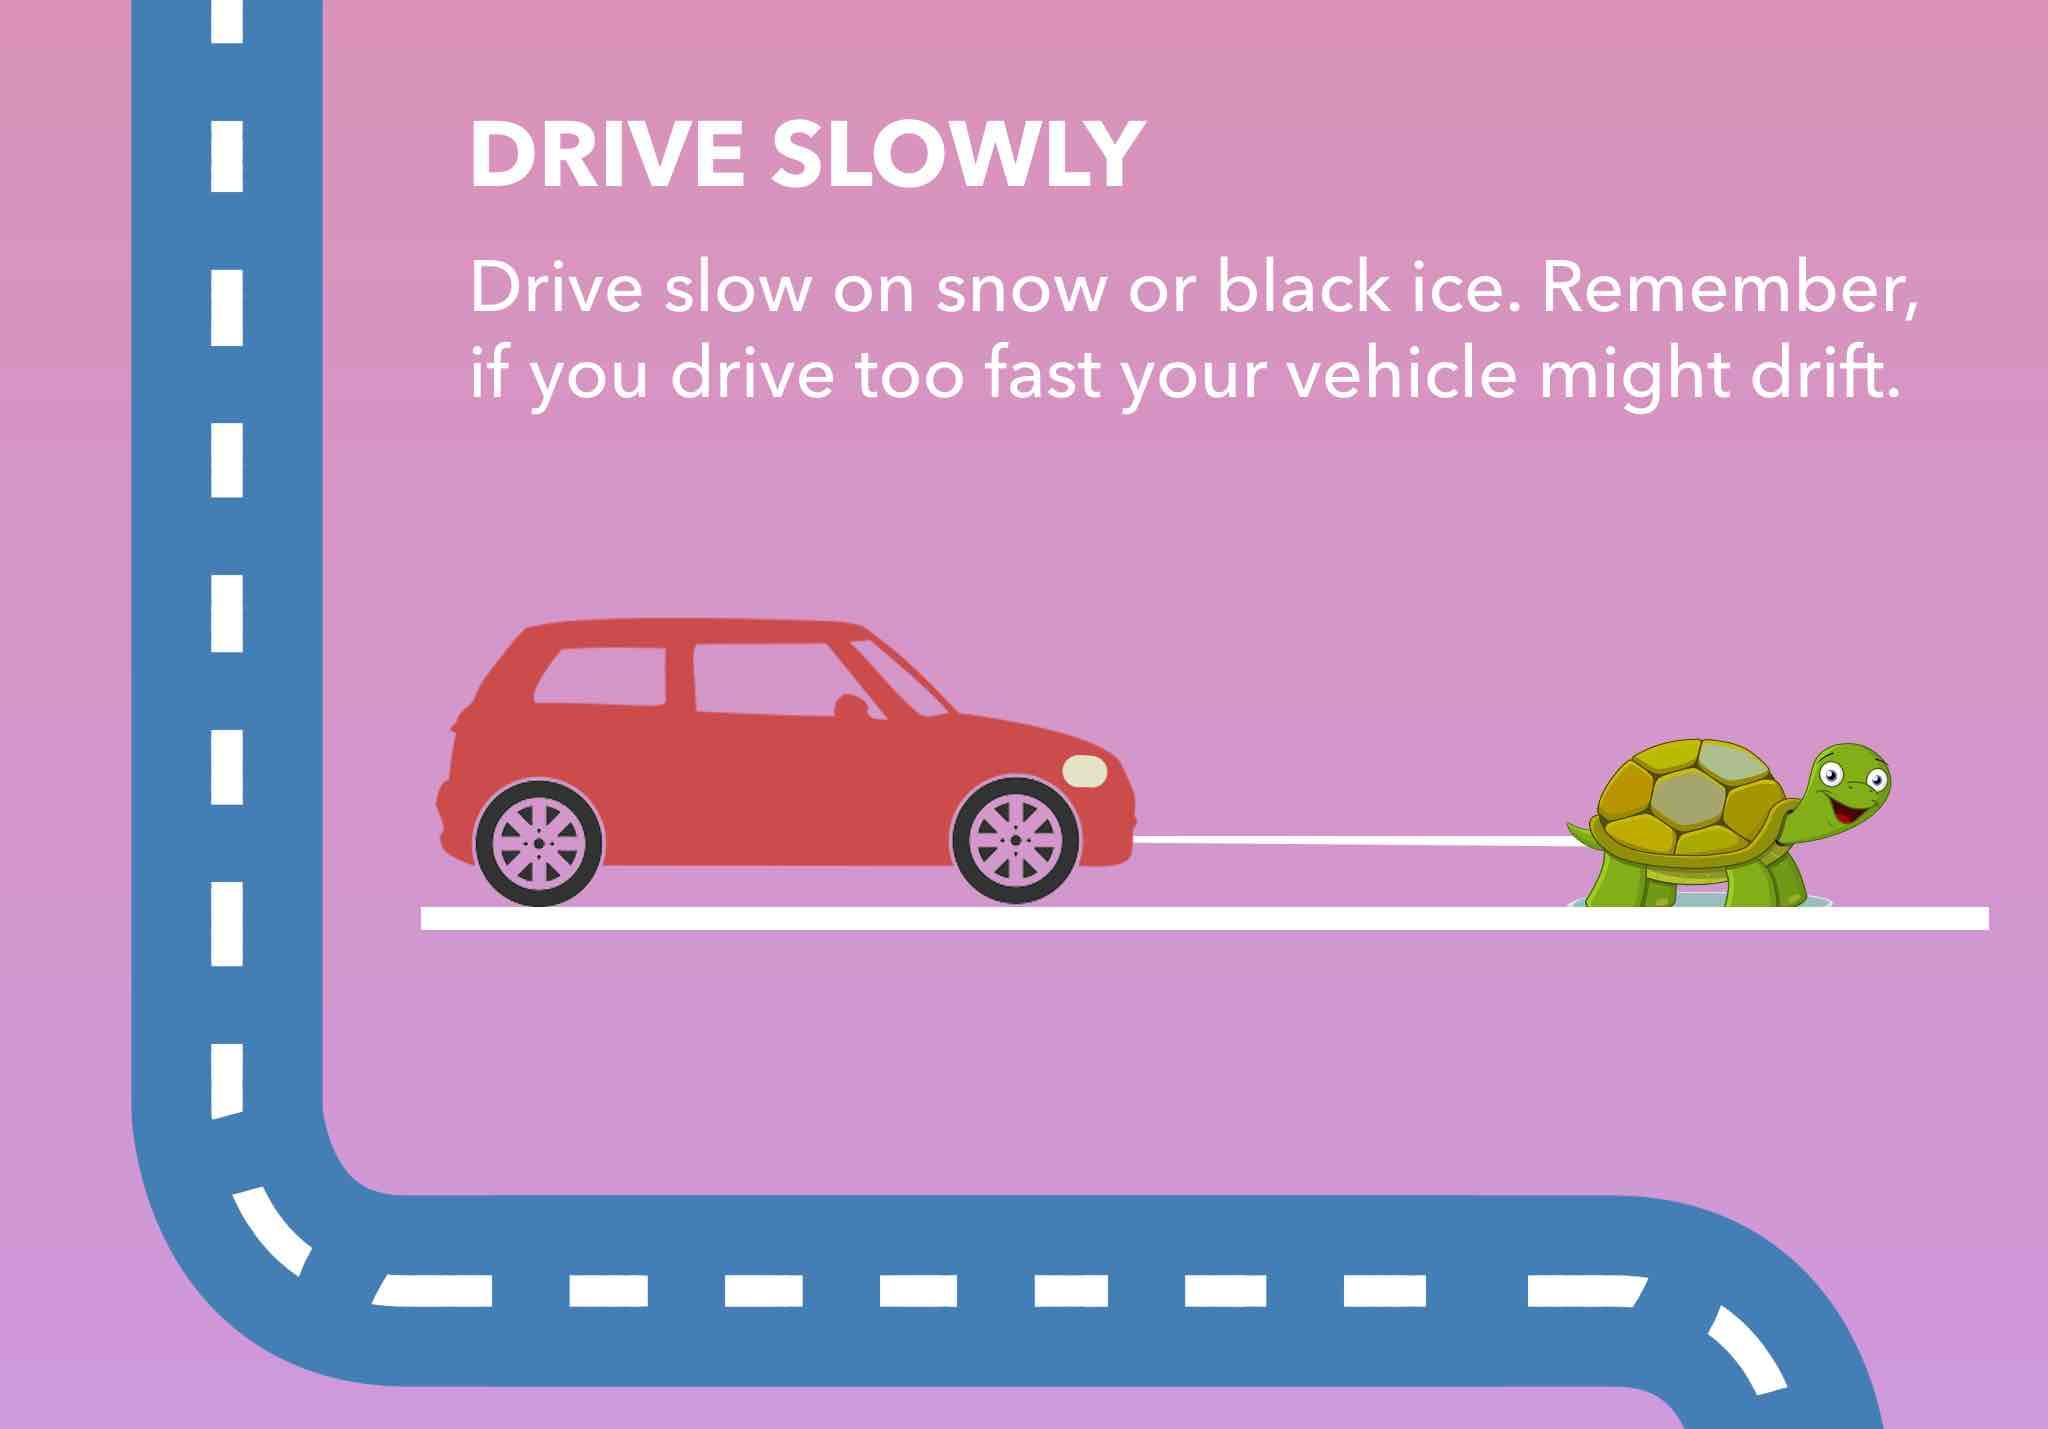 Drive slow on snow or black ice, remember  if you drive too fast your vehicle might drift.